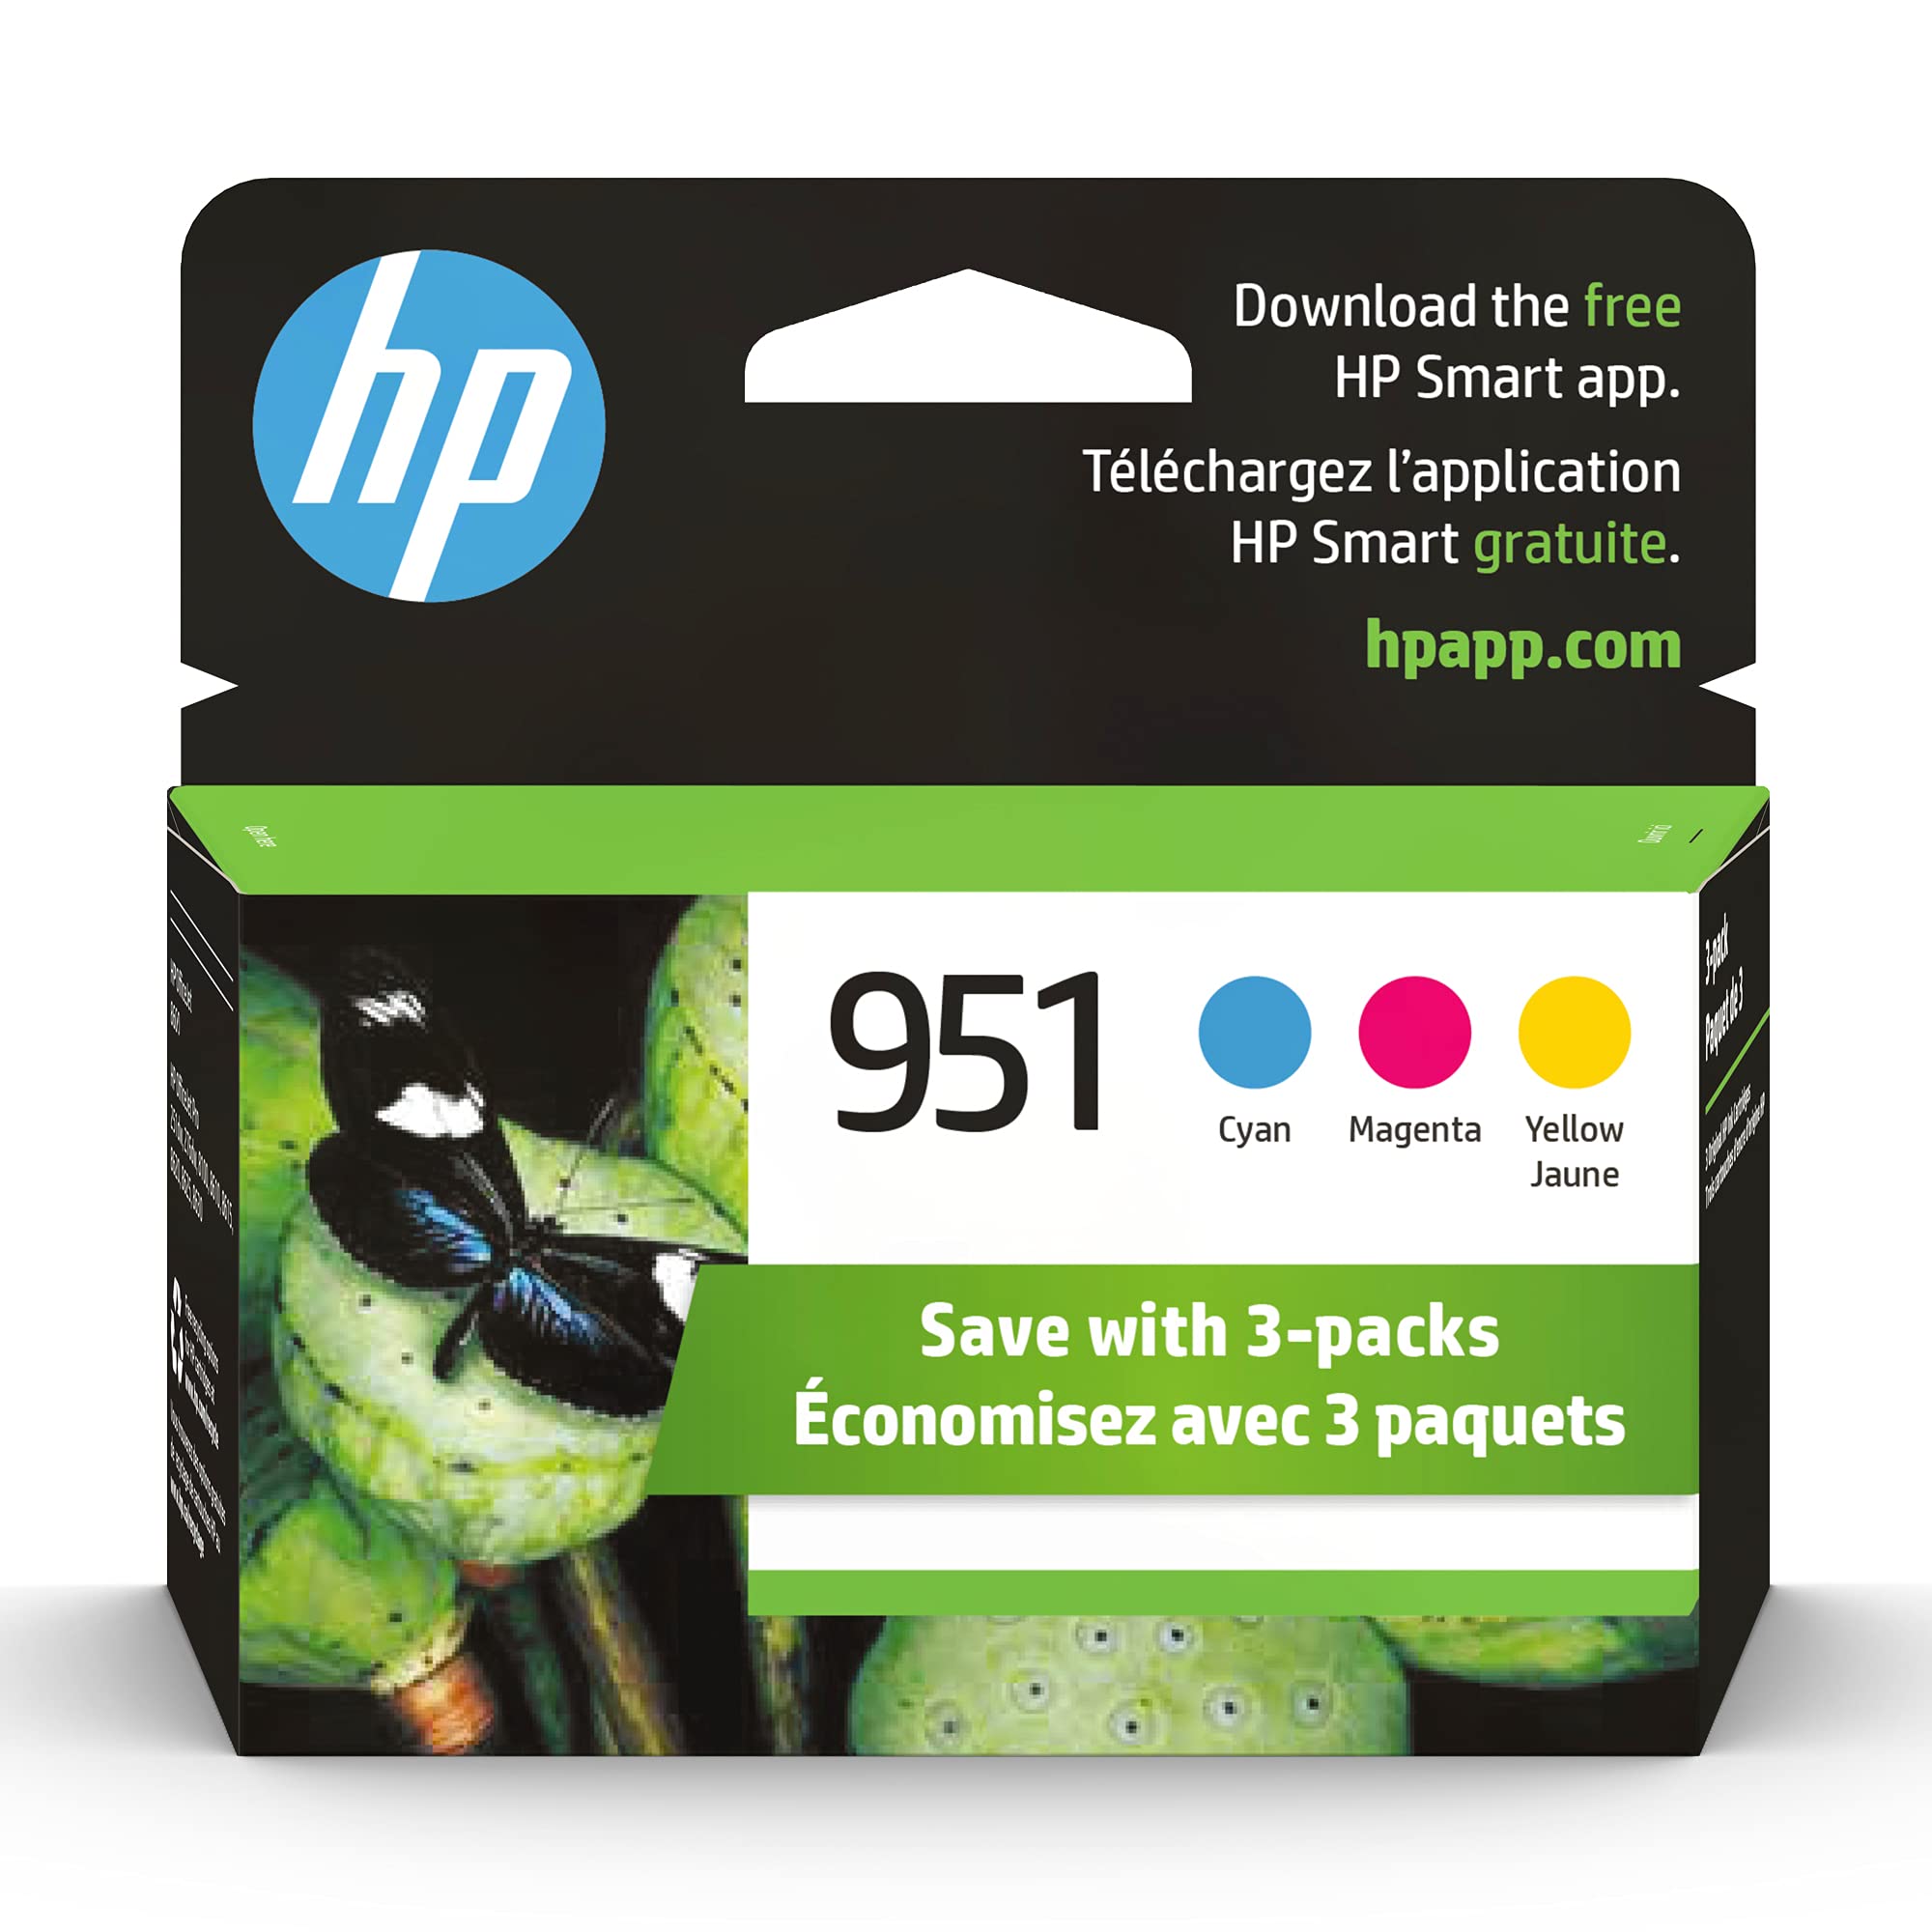 HP 951 Cyan, Magenta, Yellow Ink Cartridges | Works with HP OfficeJet 8600, HP OfficeJet Pro 251dw, 276dw, 8100, 8610, 8620, 8630 Series | Eligible for Instant Ink | CR314FN, Combo 3-Pack